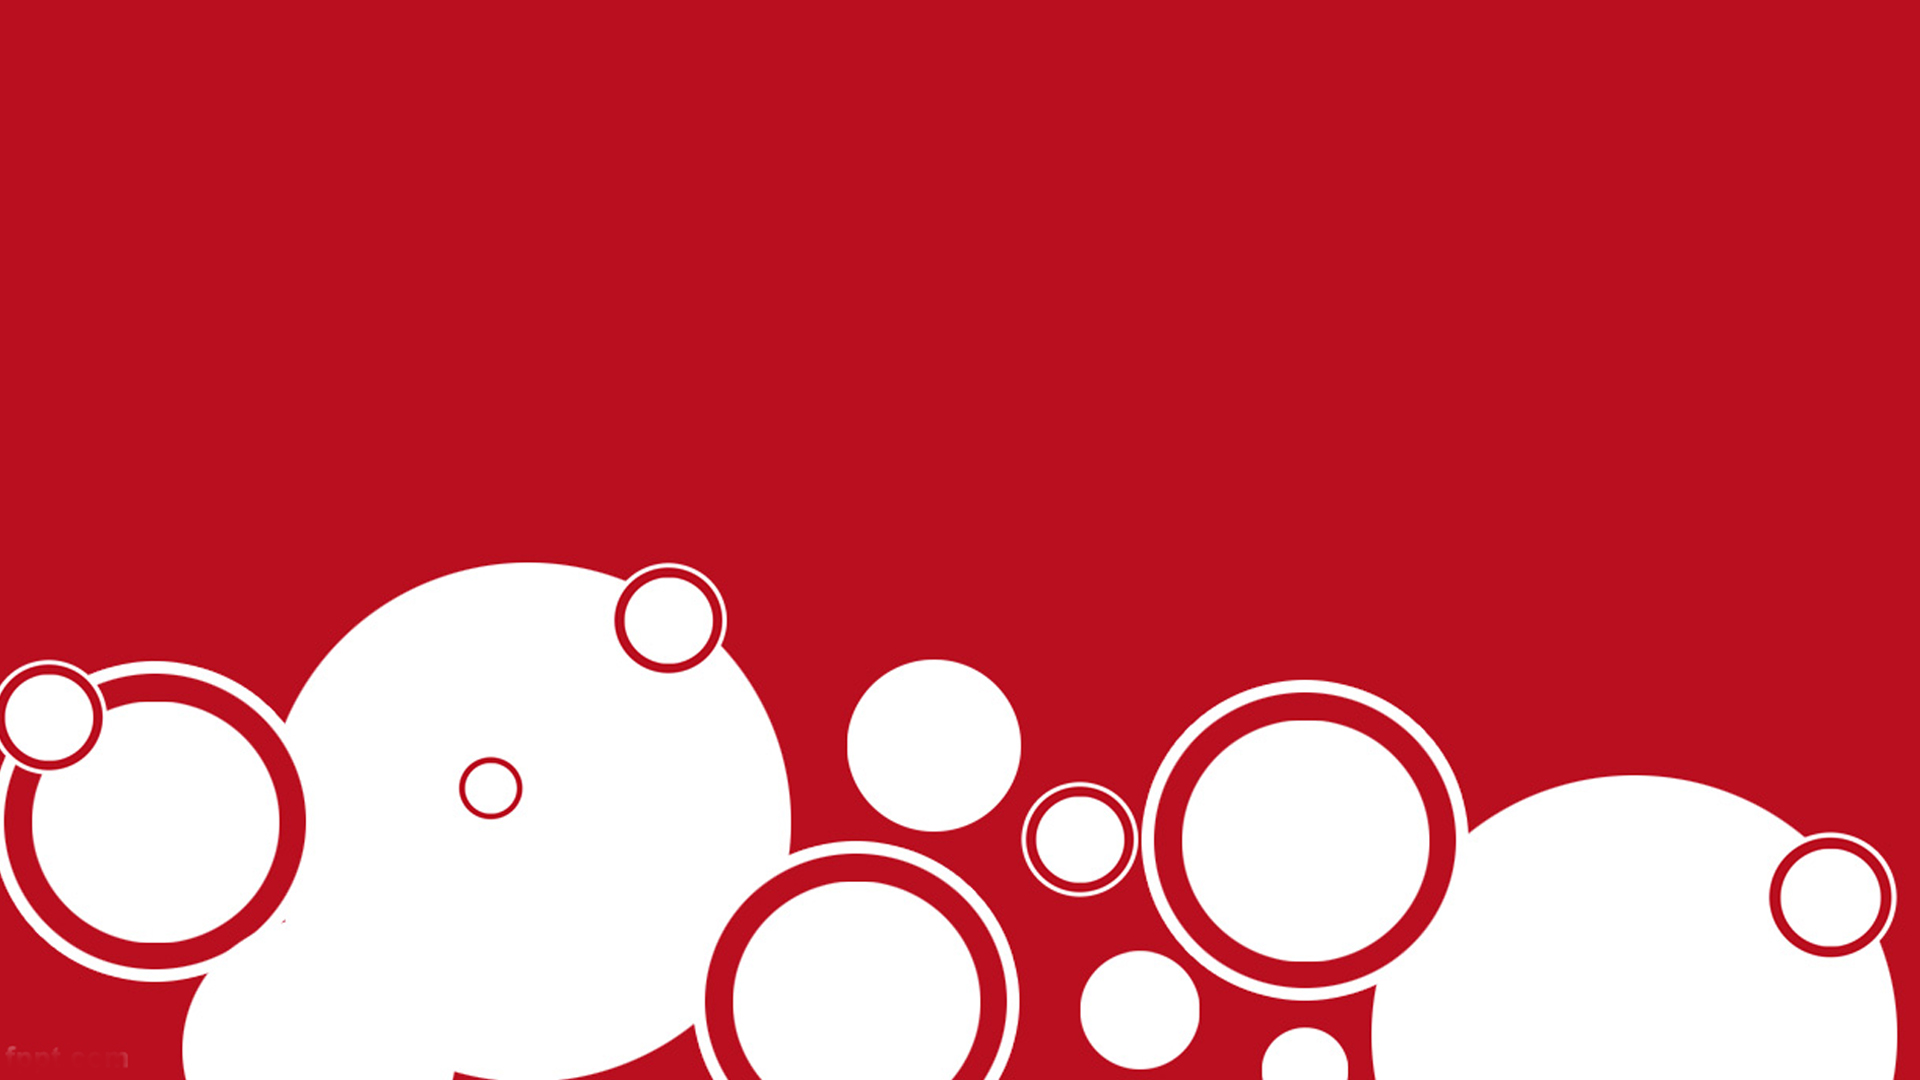 General 1920x1080 abstract circle red background